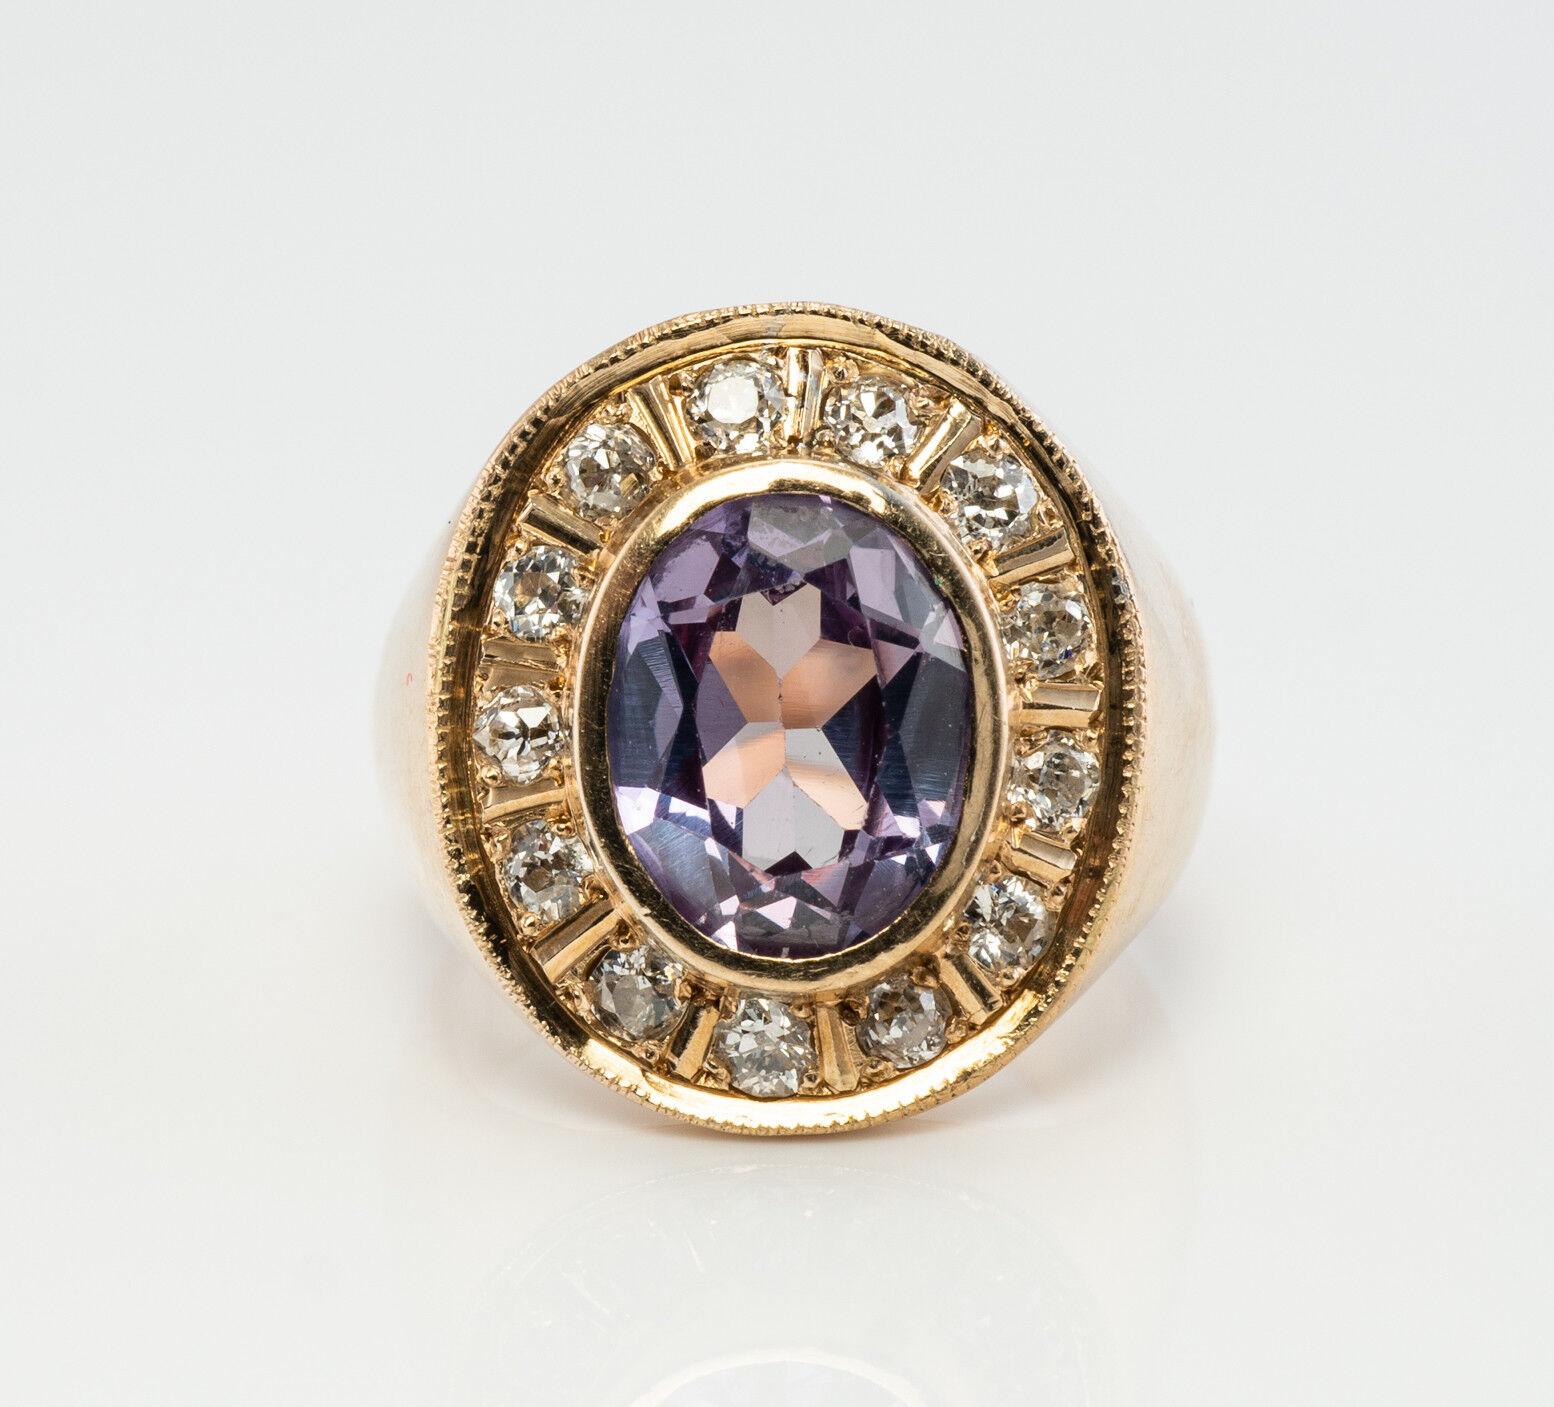 This vintage ring is crafted in solid 14K Yellow Gold (carefully tested and guaranteed). The center genuine Earth mined Amethyst measures 10mm x 8mm (2.40 carats). This is a very clean and transparent gem of great intensity and strong brilliance.